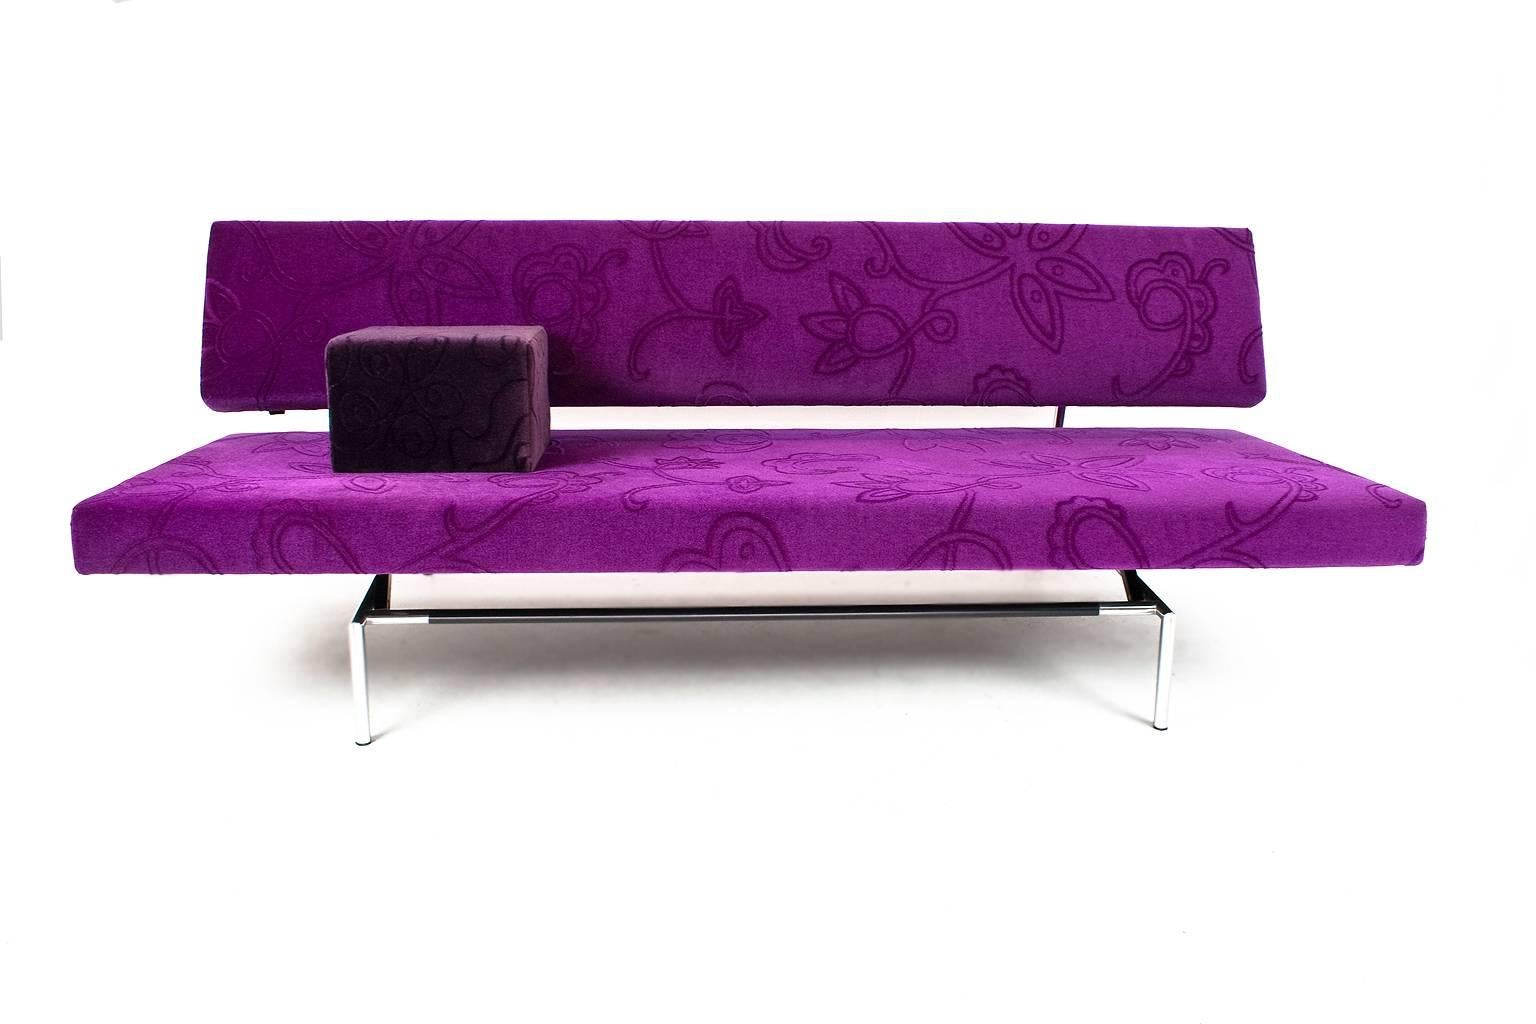 Sleeper sofa daybed BR02 designed by Martin Visser in 1960 and produced by Spectrum, Bergeijk (NL), by the previous owner recently upholstered in a limited edition excellent quality velvet. The design has become a Dutch icon.

Martin Visser